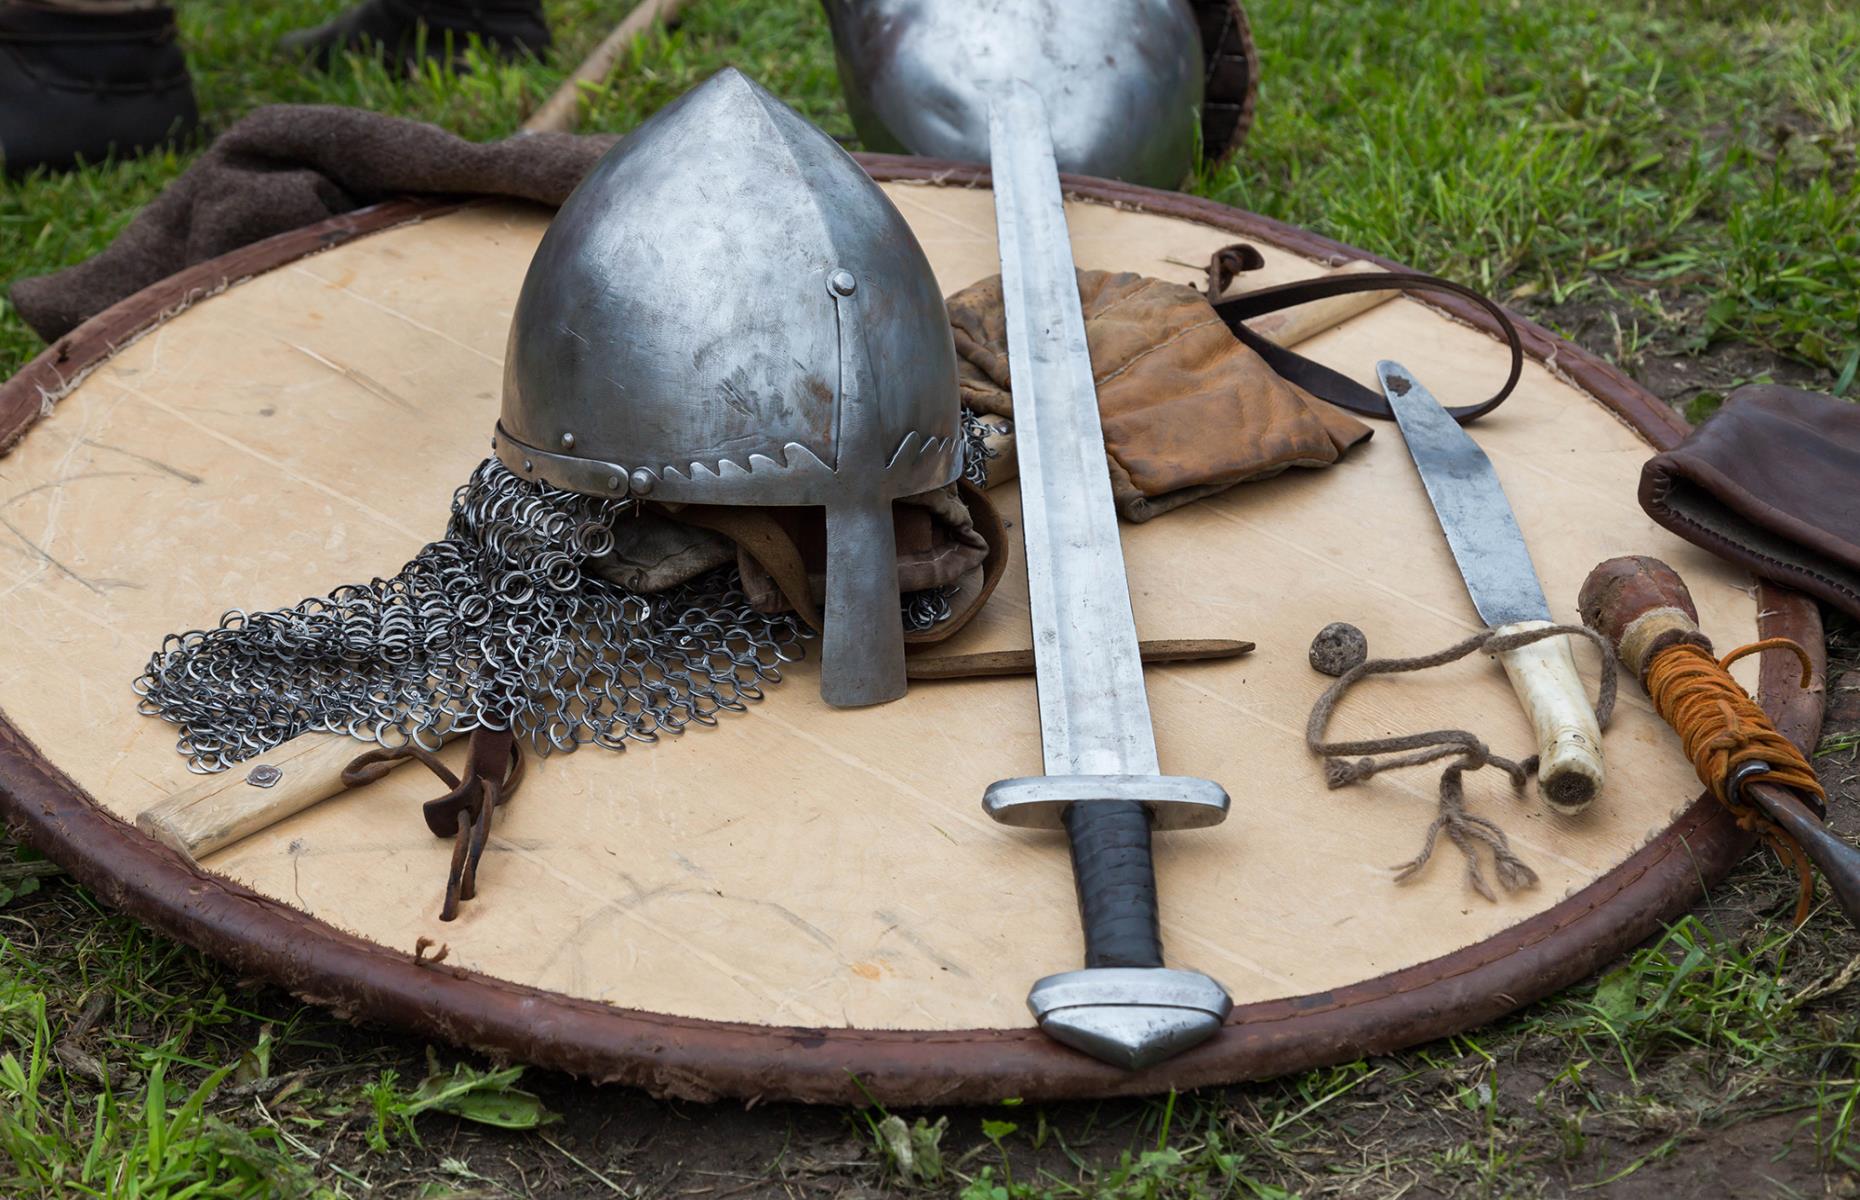 <p>With more movement around the world also came war. Of course the Vikings weren’t the first to plunder the lands they journeyed to, but the Scandinavian warriors became among the most infamous pillagers from 830 BC.</p>